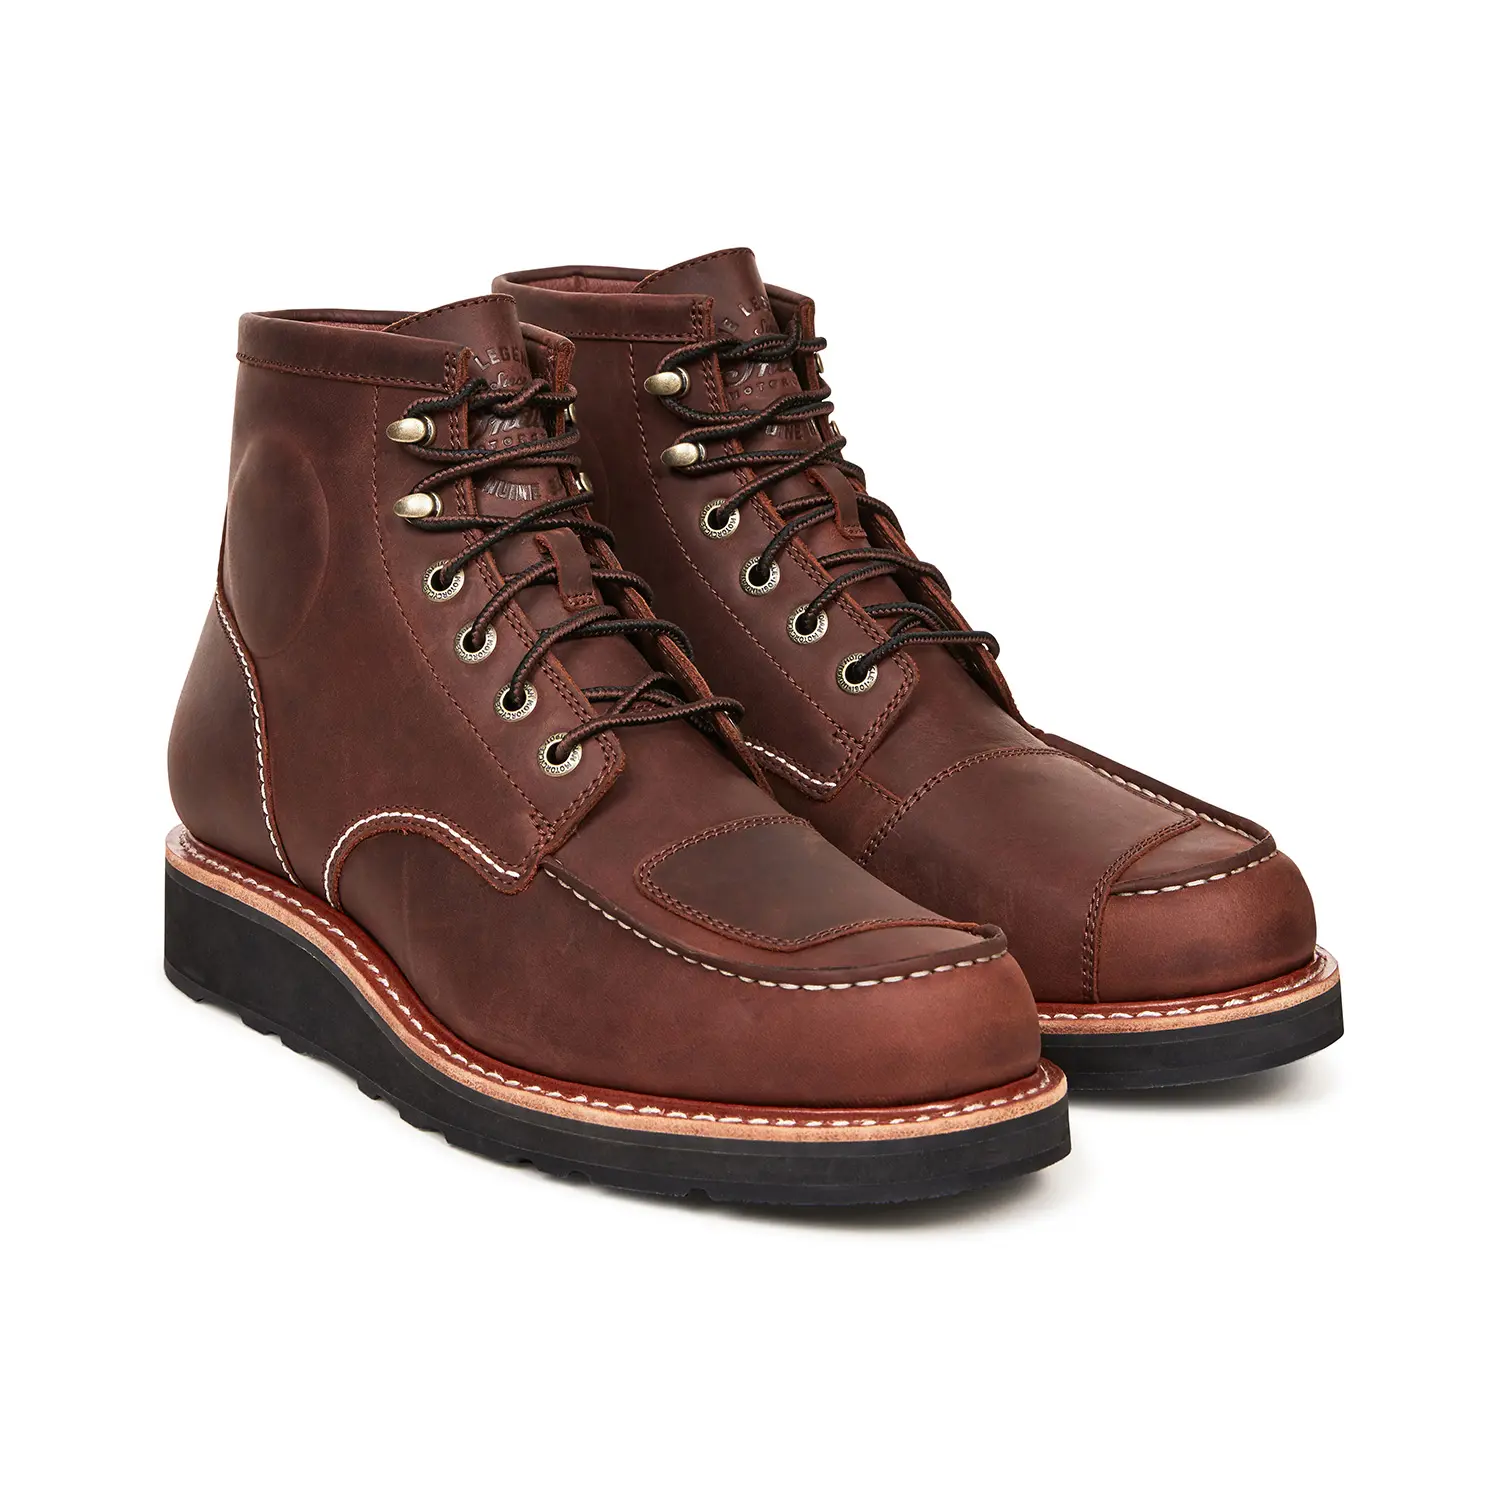 Buy Red Wing Safety Toe Online In India -  India